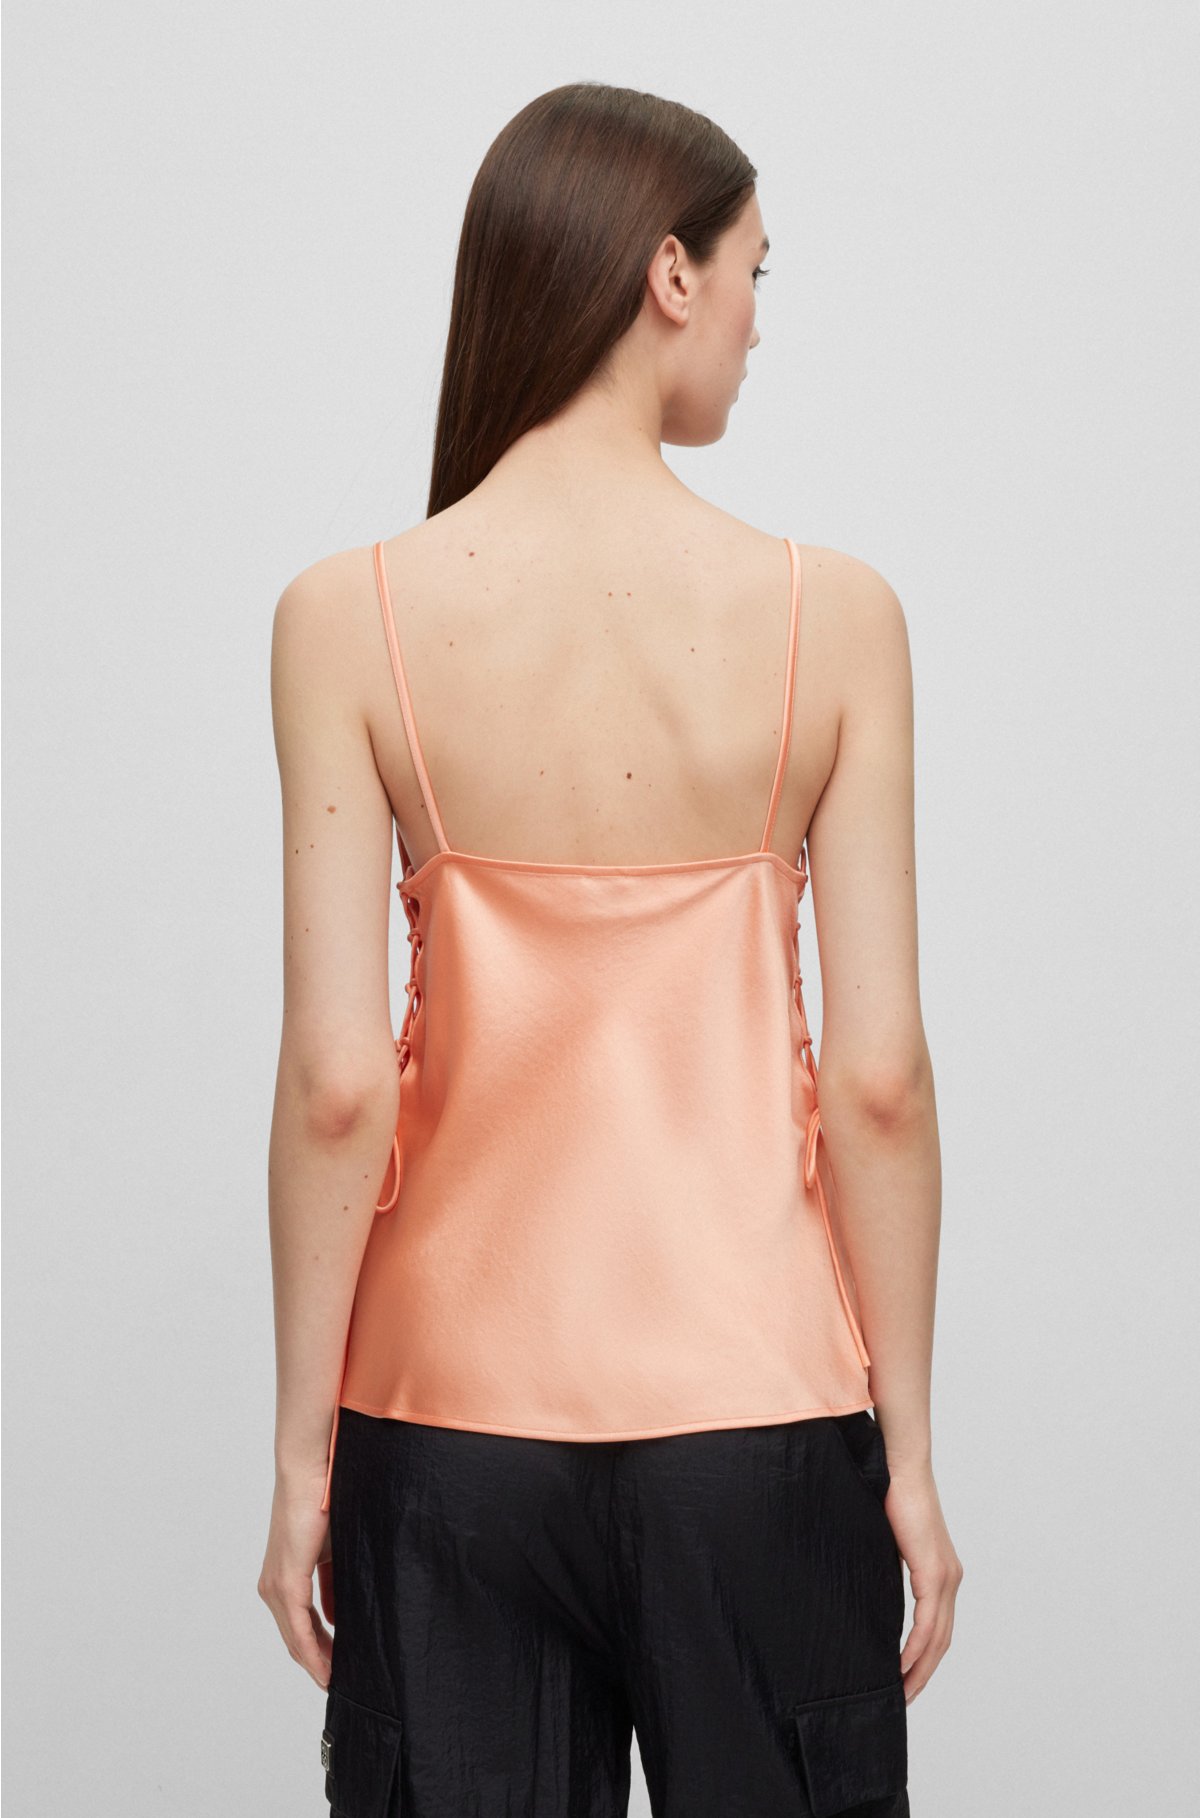 HUGO - Strappy camisole in satin with side laces